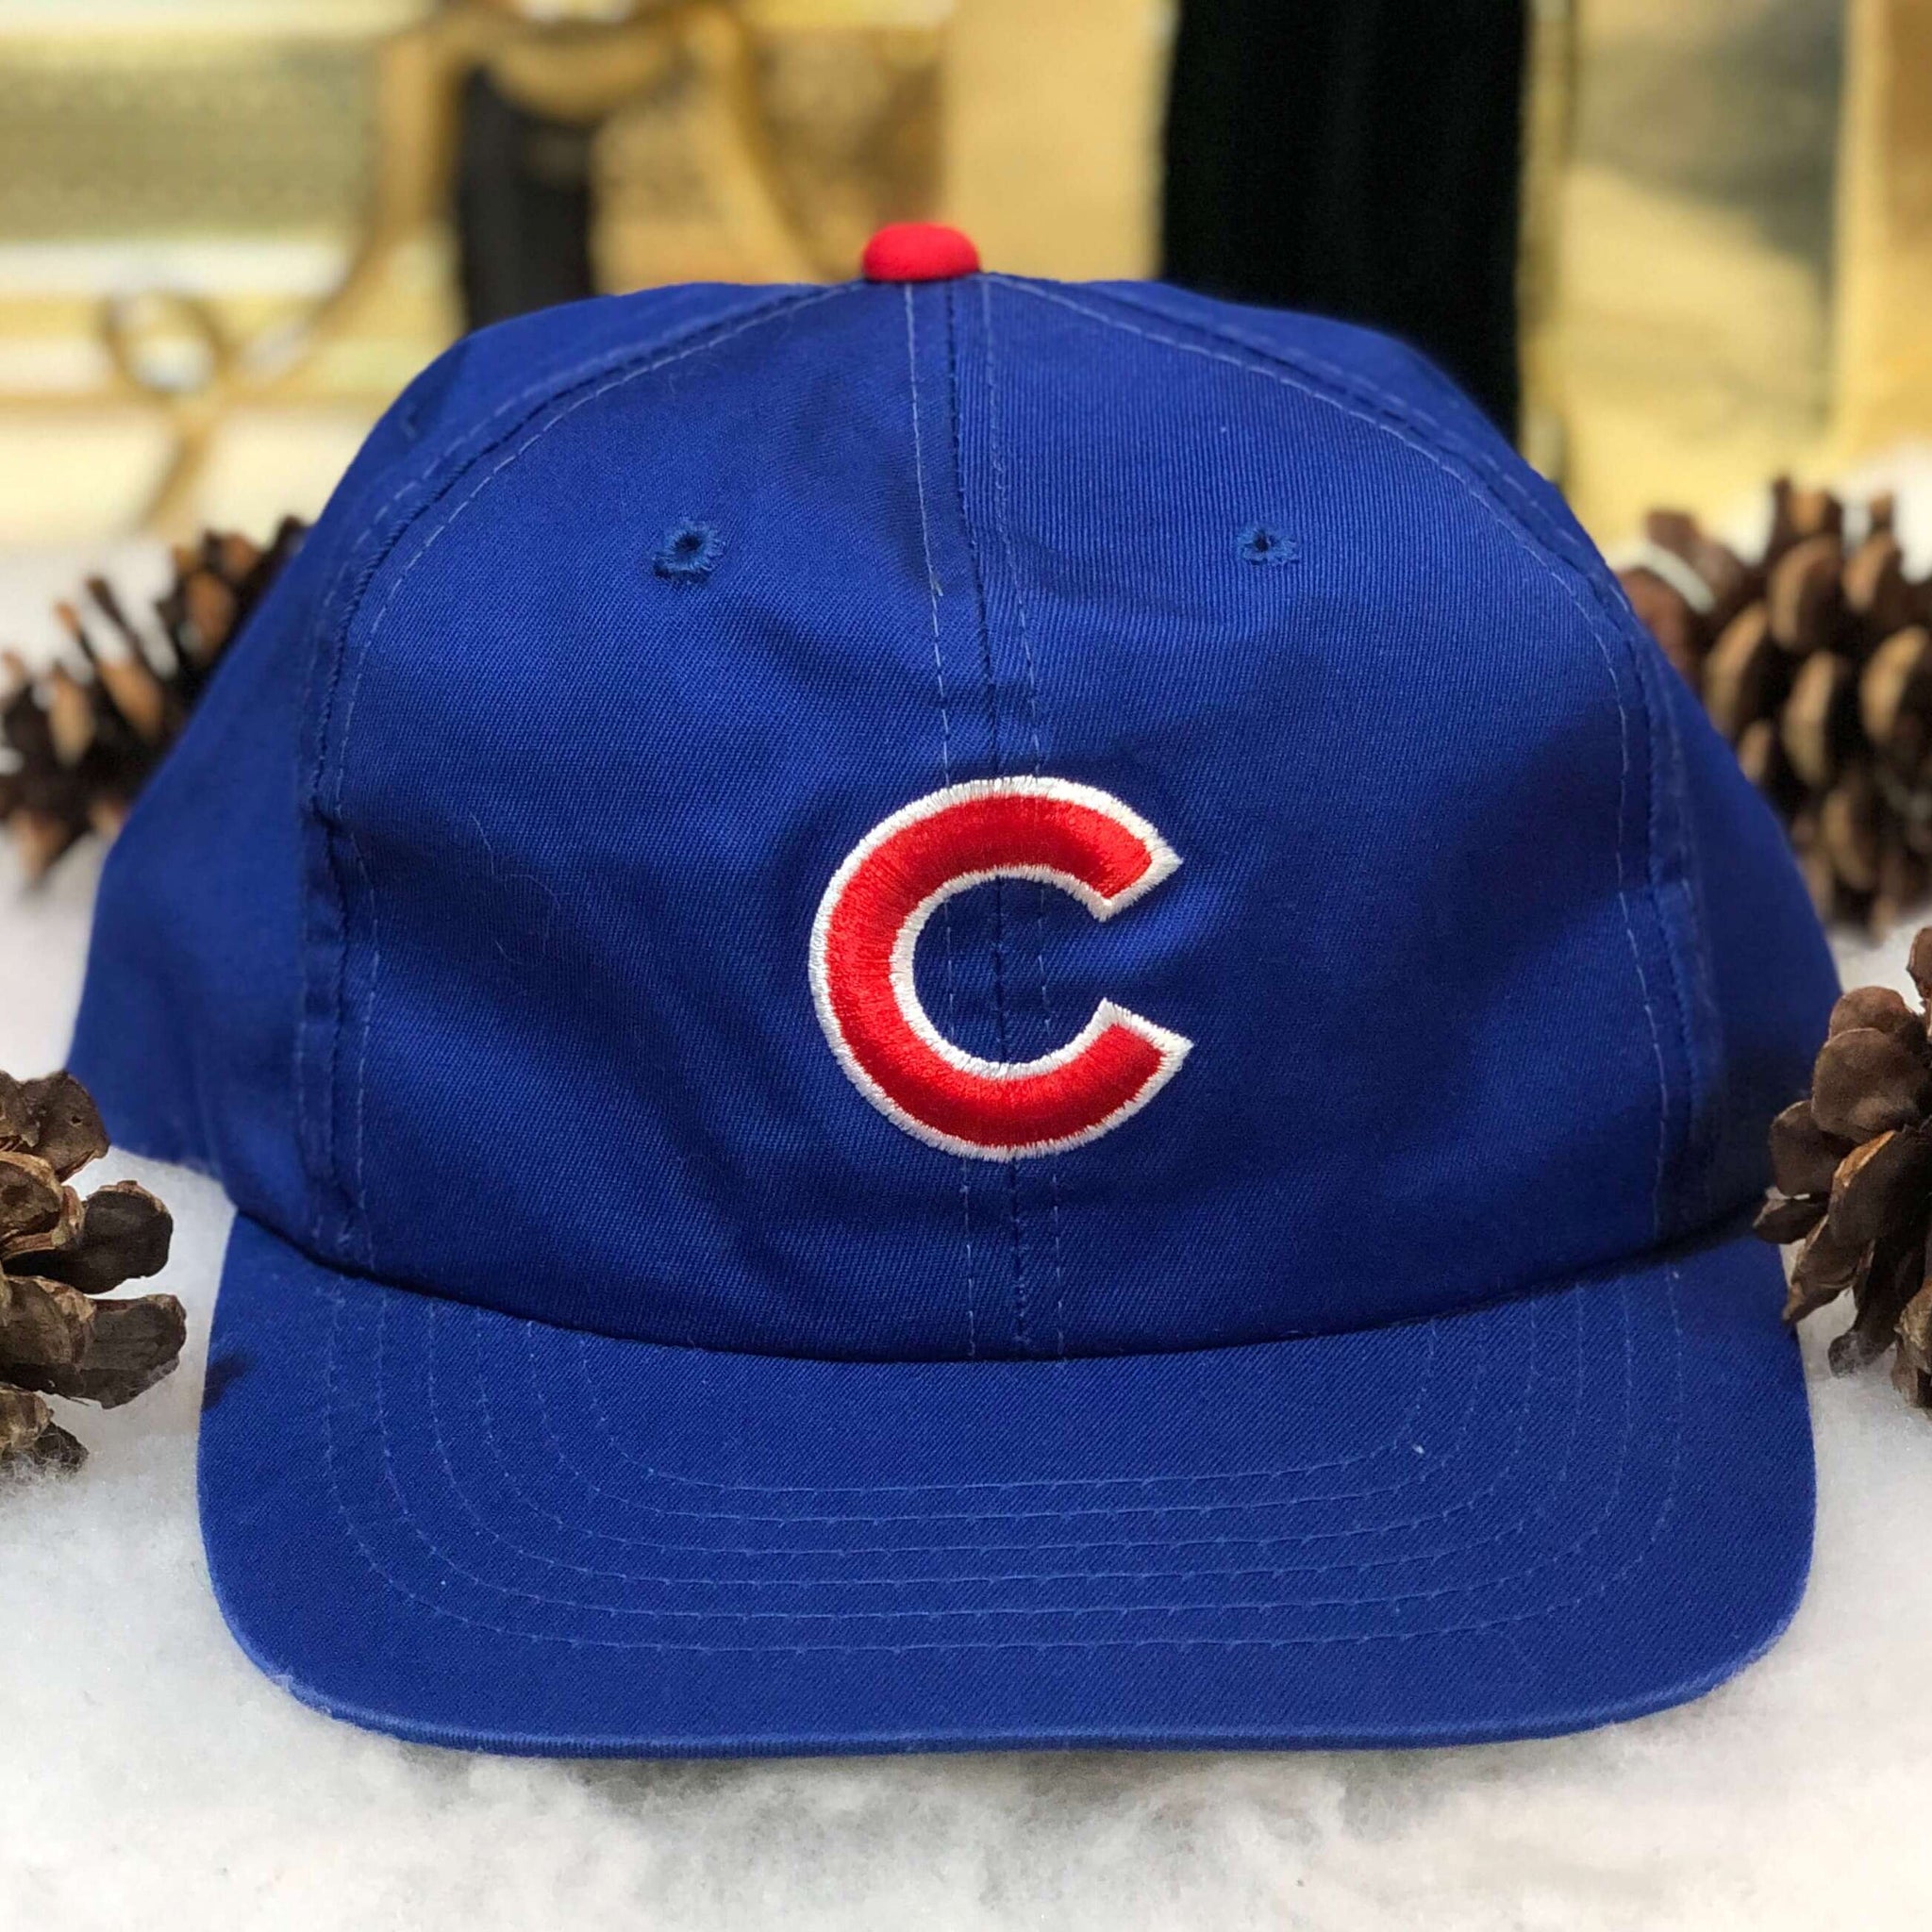 Vintage MLB Chicago Cubs The G Cap Twill Snapback Hat